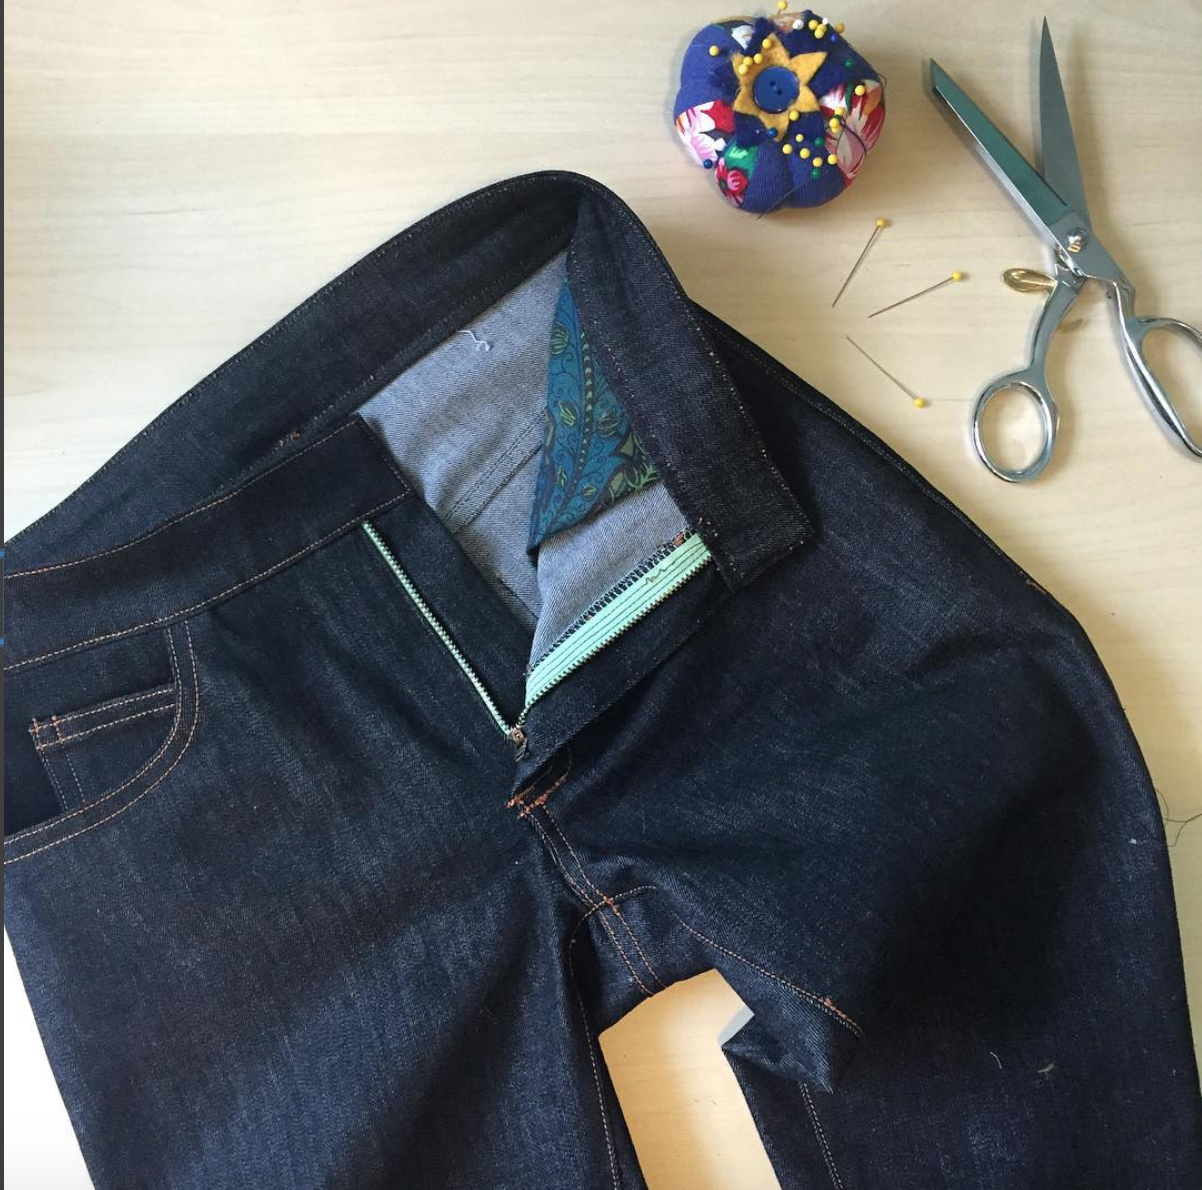 Sew Your Own Jeans